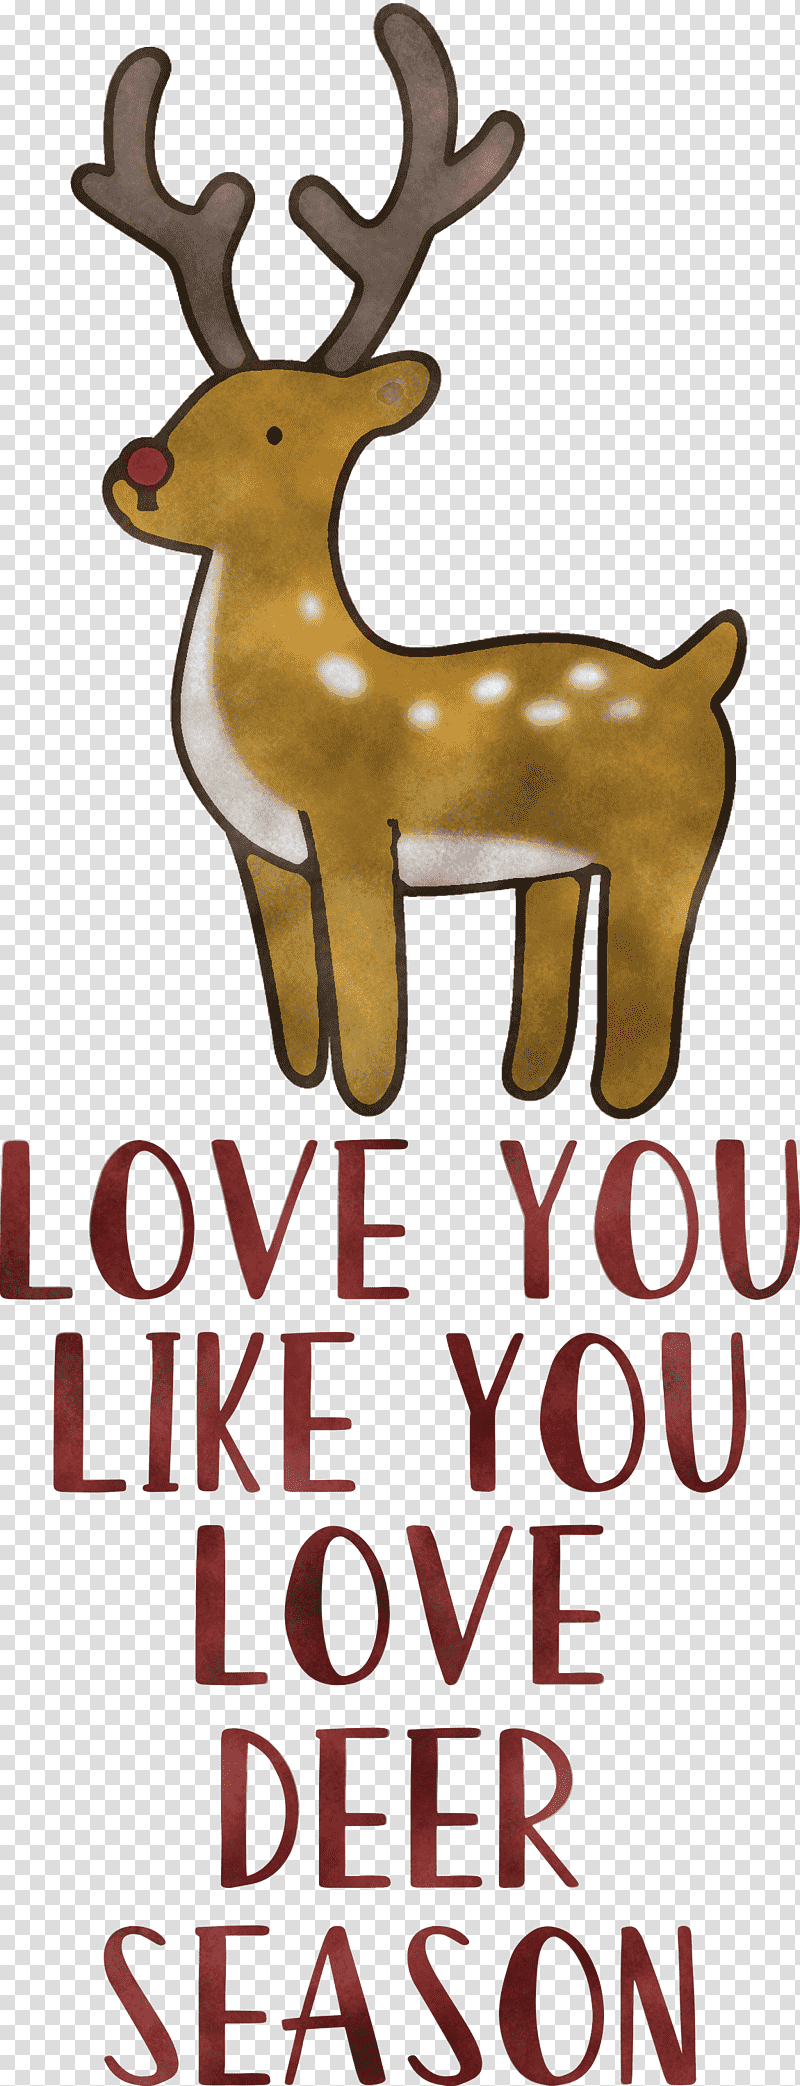 Love Deer Season, Reindeer, Christmas Archives, Holiday, Santa Claus, Data transparent background PNG clipart